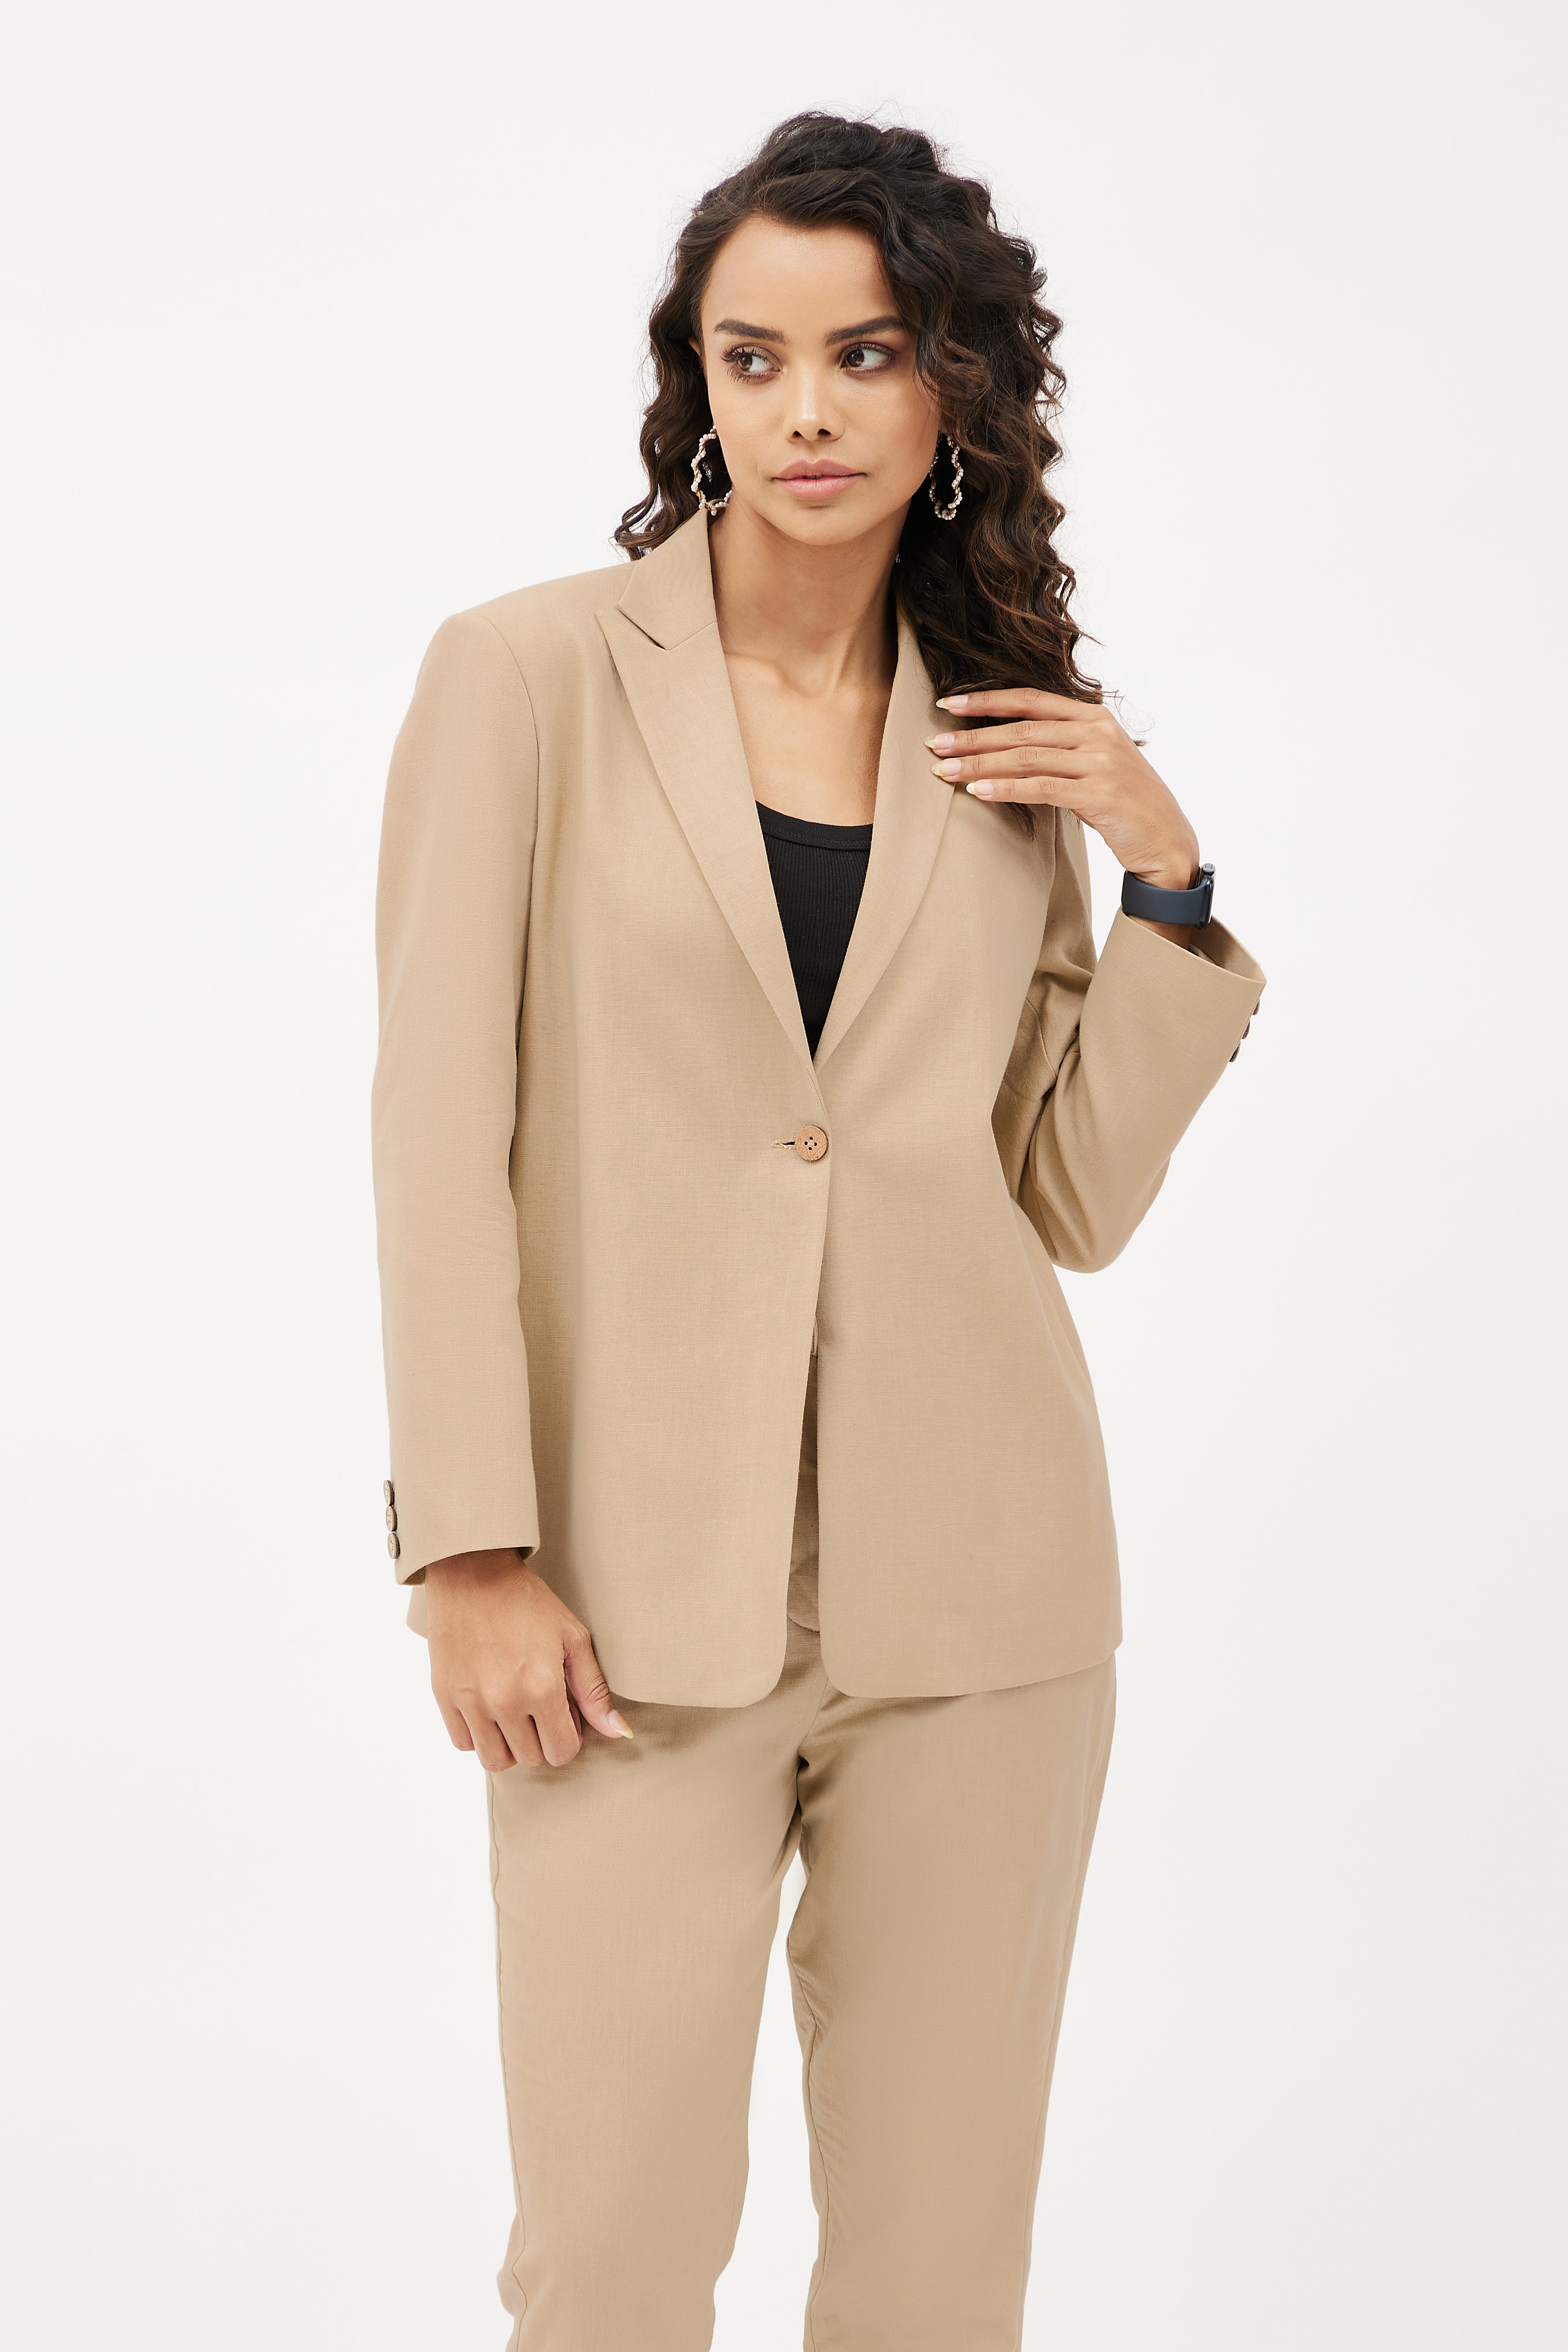 Of Dreams and Seams: How-To: Turn Men's suit pants into Women's slacks